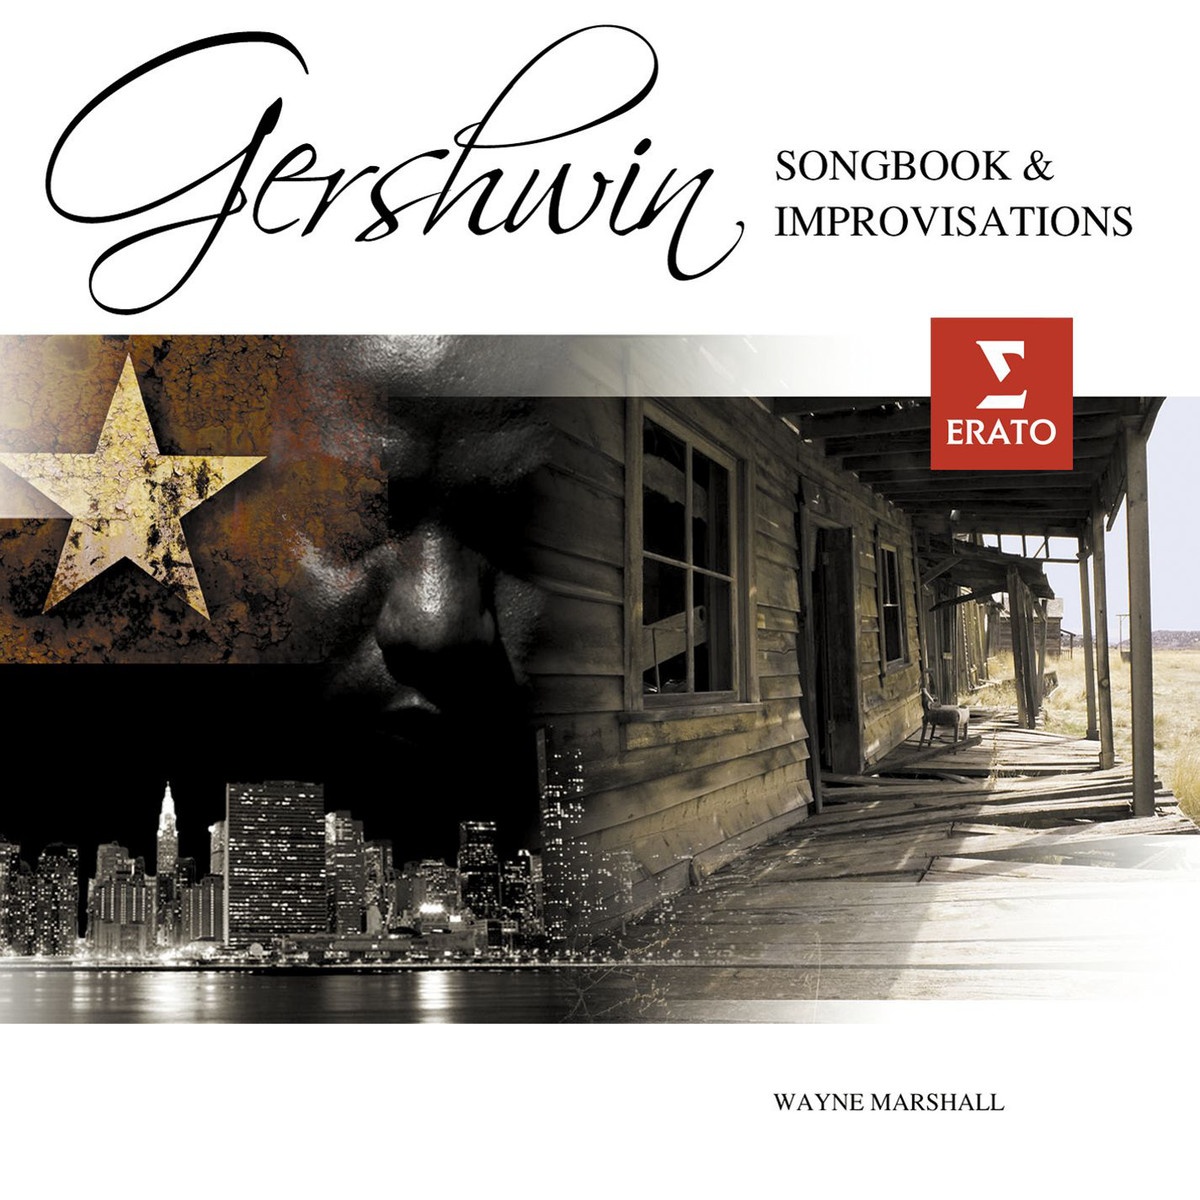 A Gershwin Songbook: improvisations on songs by George Gershwin: Let's call the whole thing off (Shall we dance?)